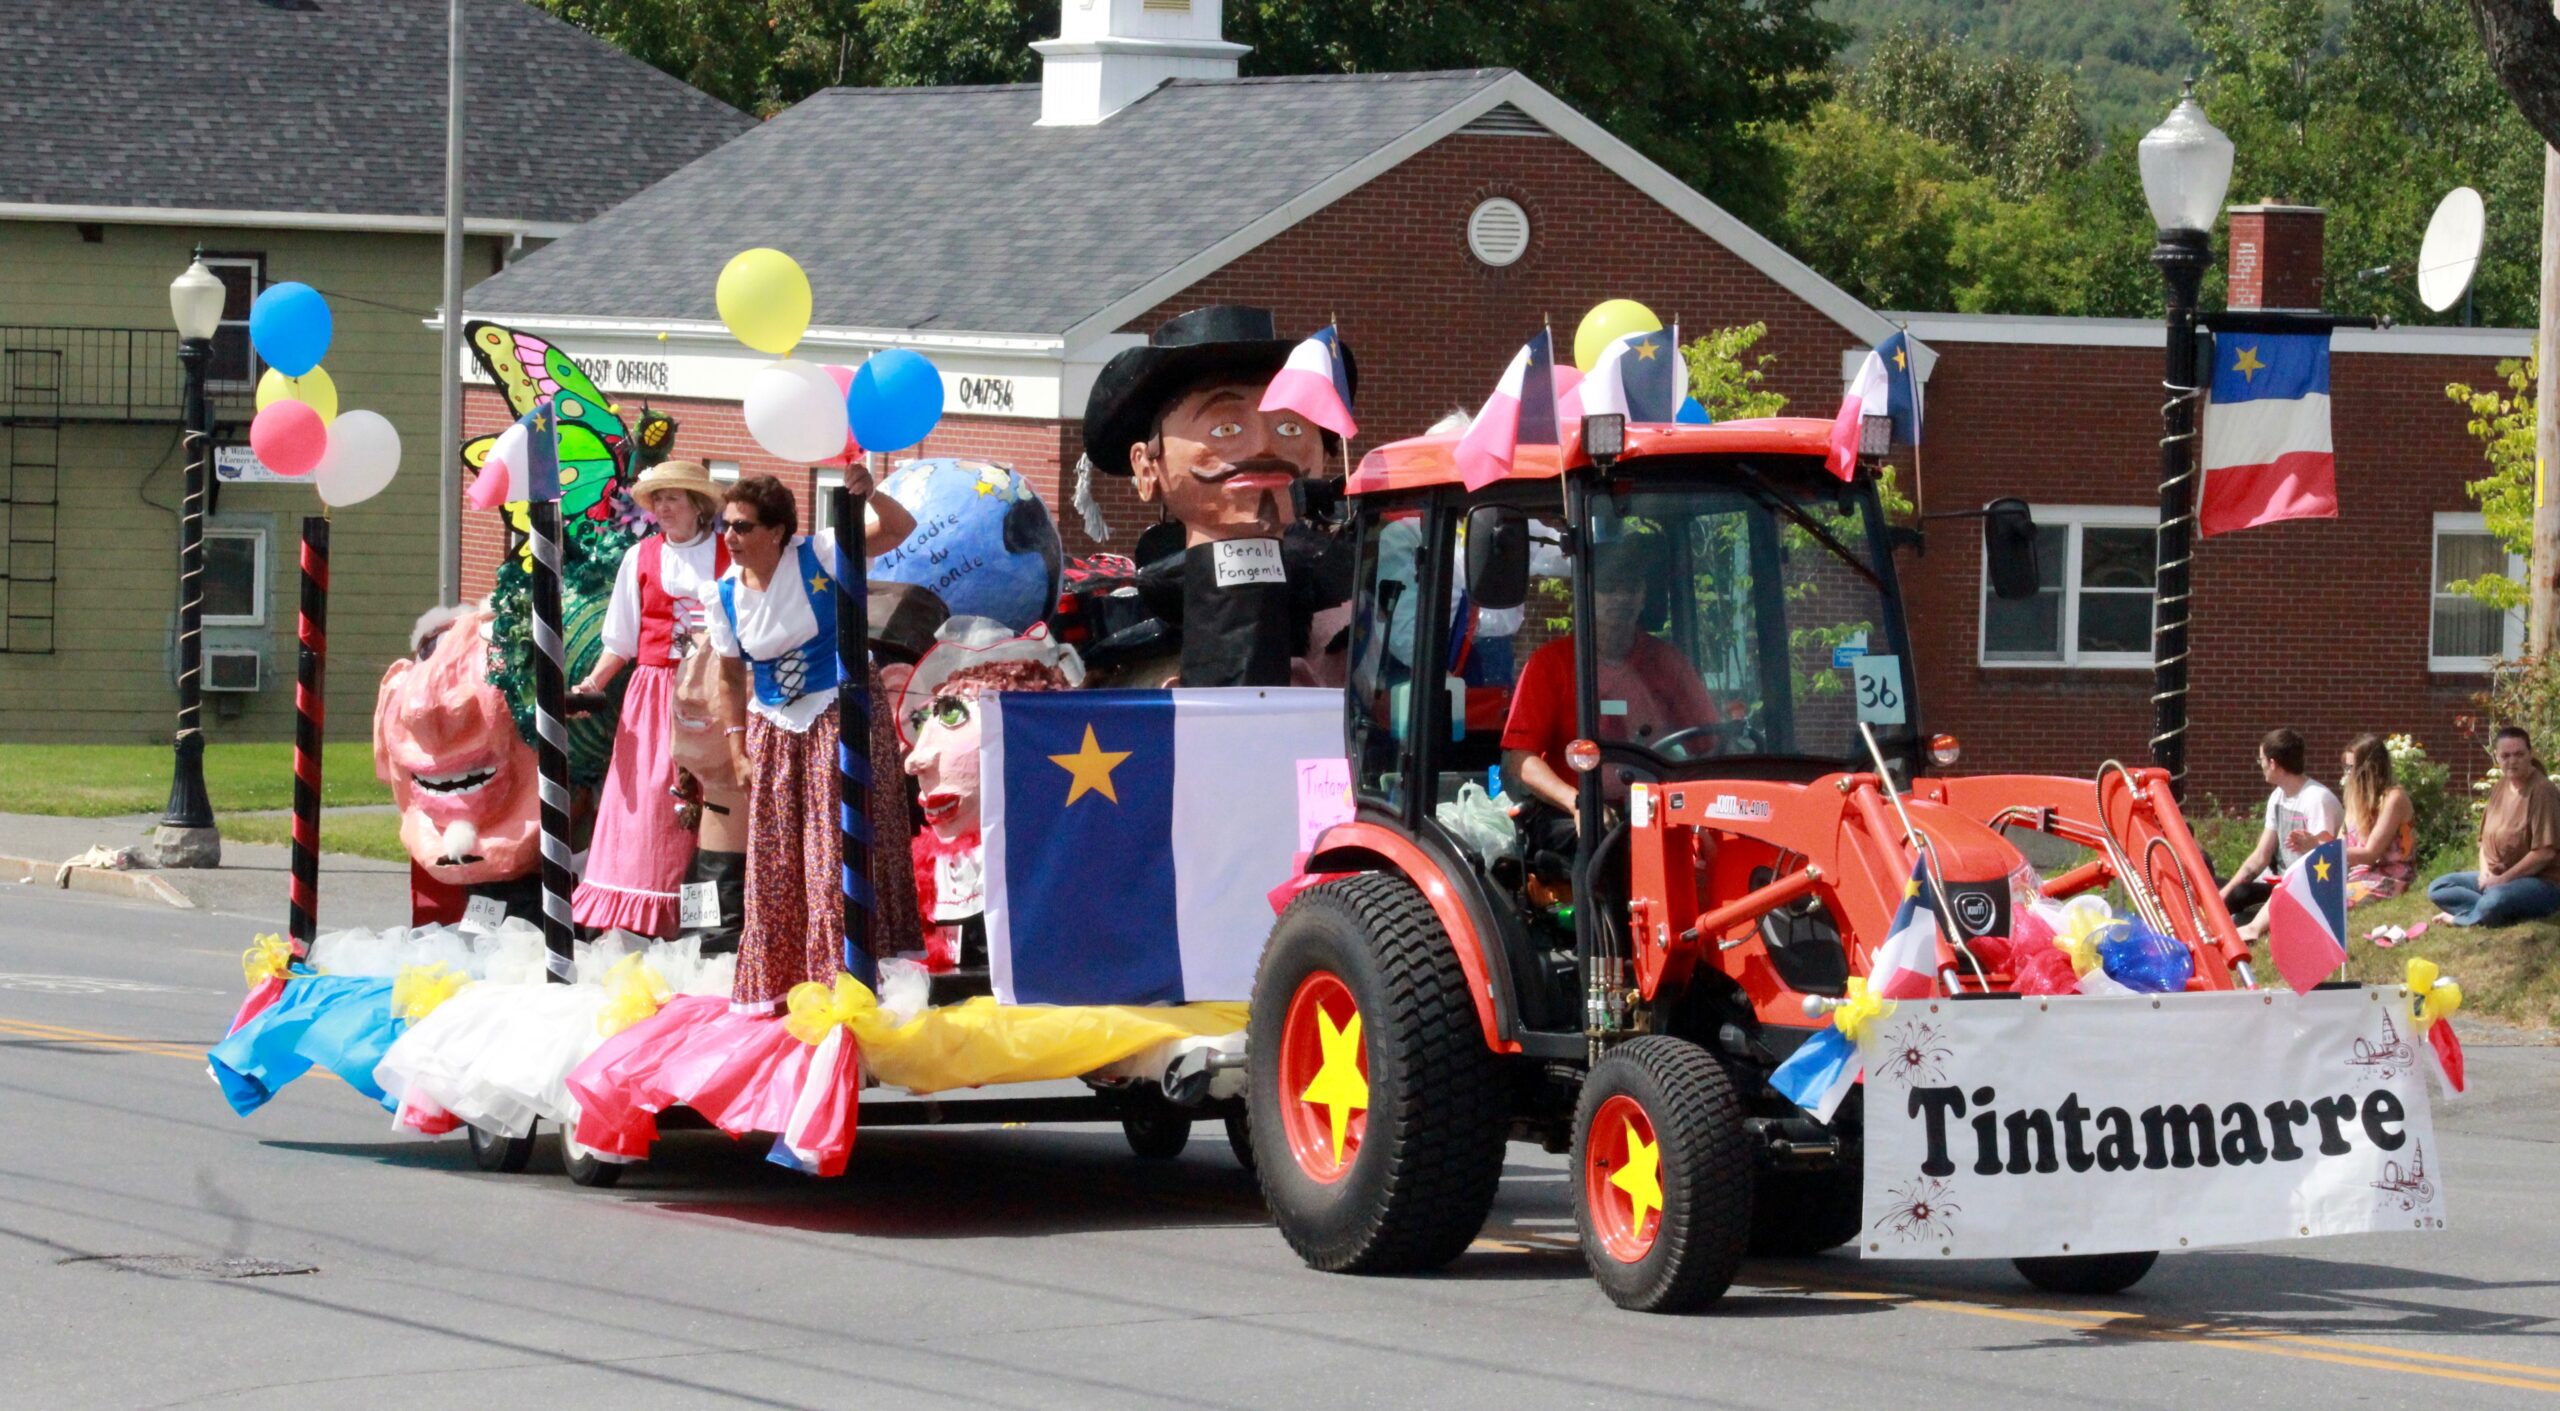 A float drives down Main Street in Madawaska during the Acadian Festival Parade on Sunday, Aug. 13. The float advertised the traditional tintamarre, where folks march through streets making fanfare with improvised instruments and noisemakers, which was to be held on Tuesday, Aug. 15, during National Acadian Day. (Courtesy of Elizabeth Theriault)